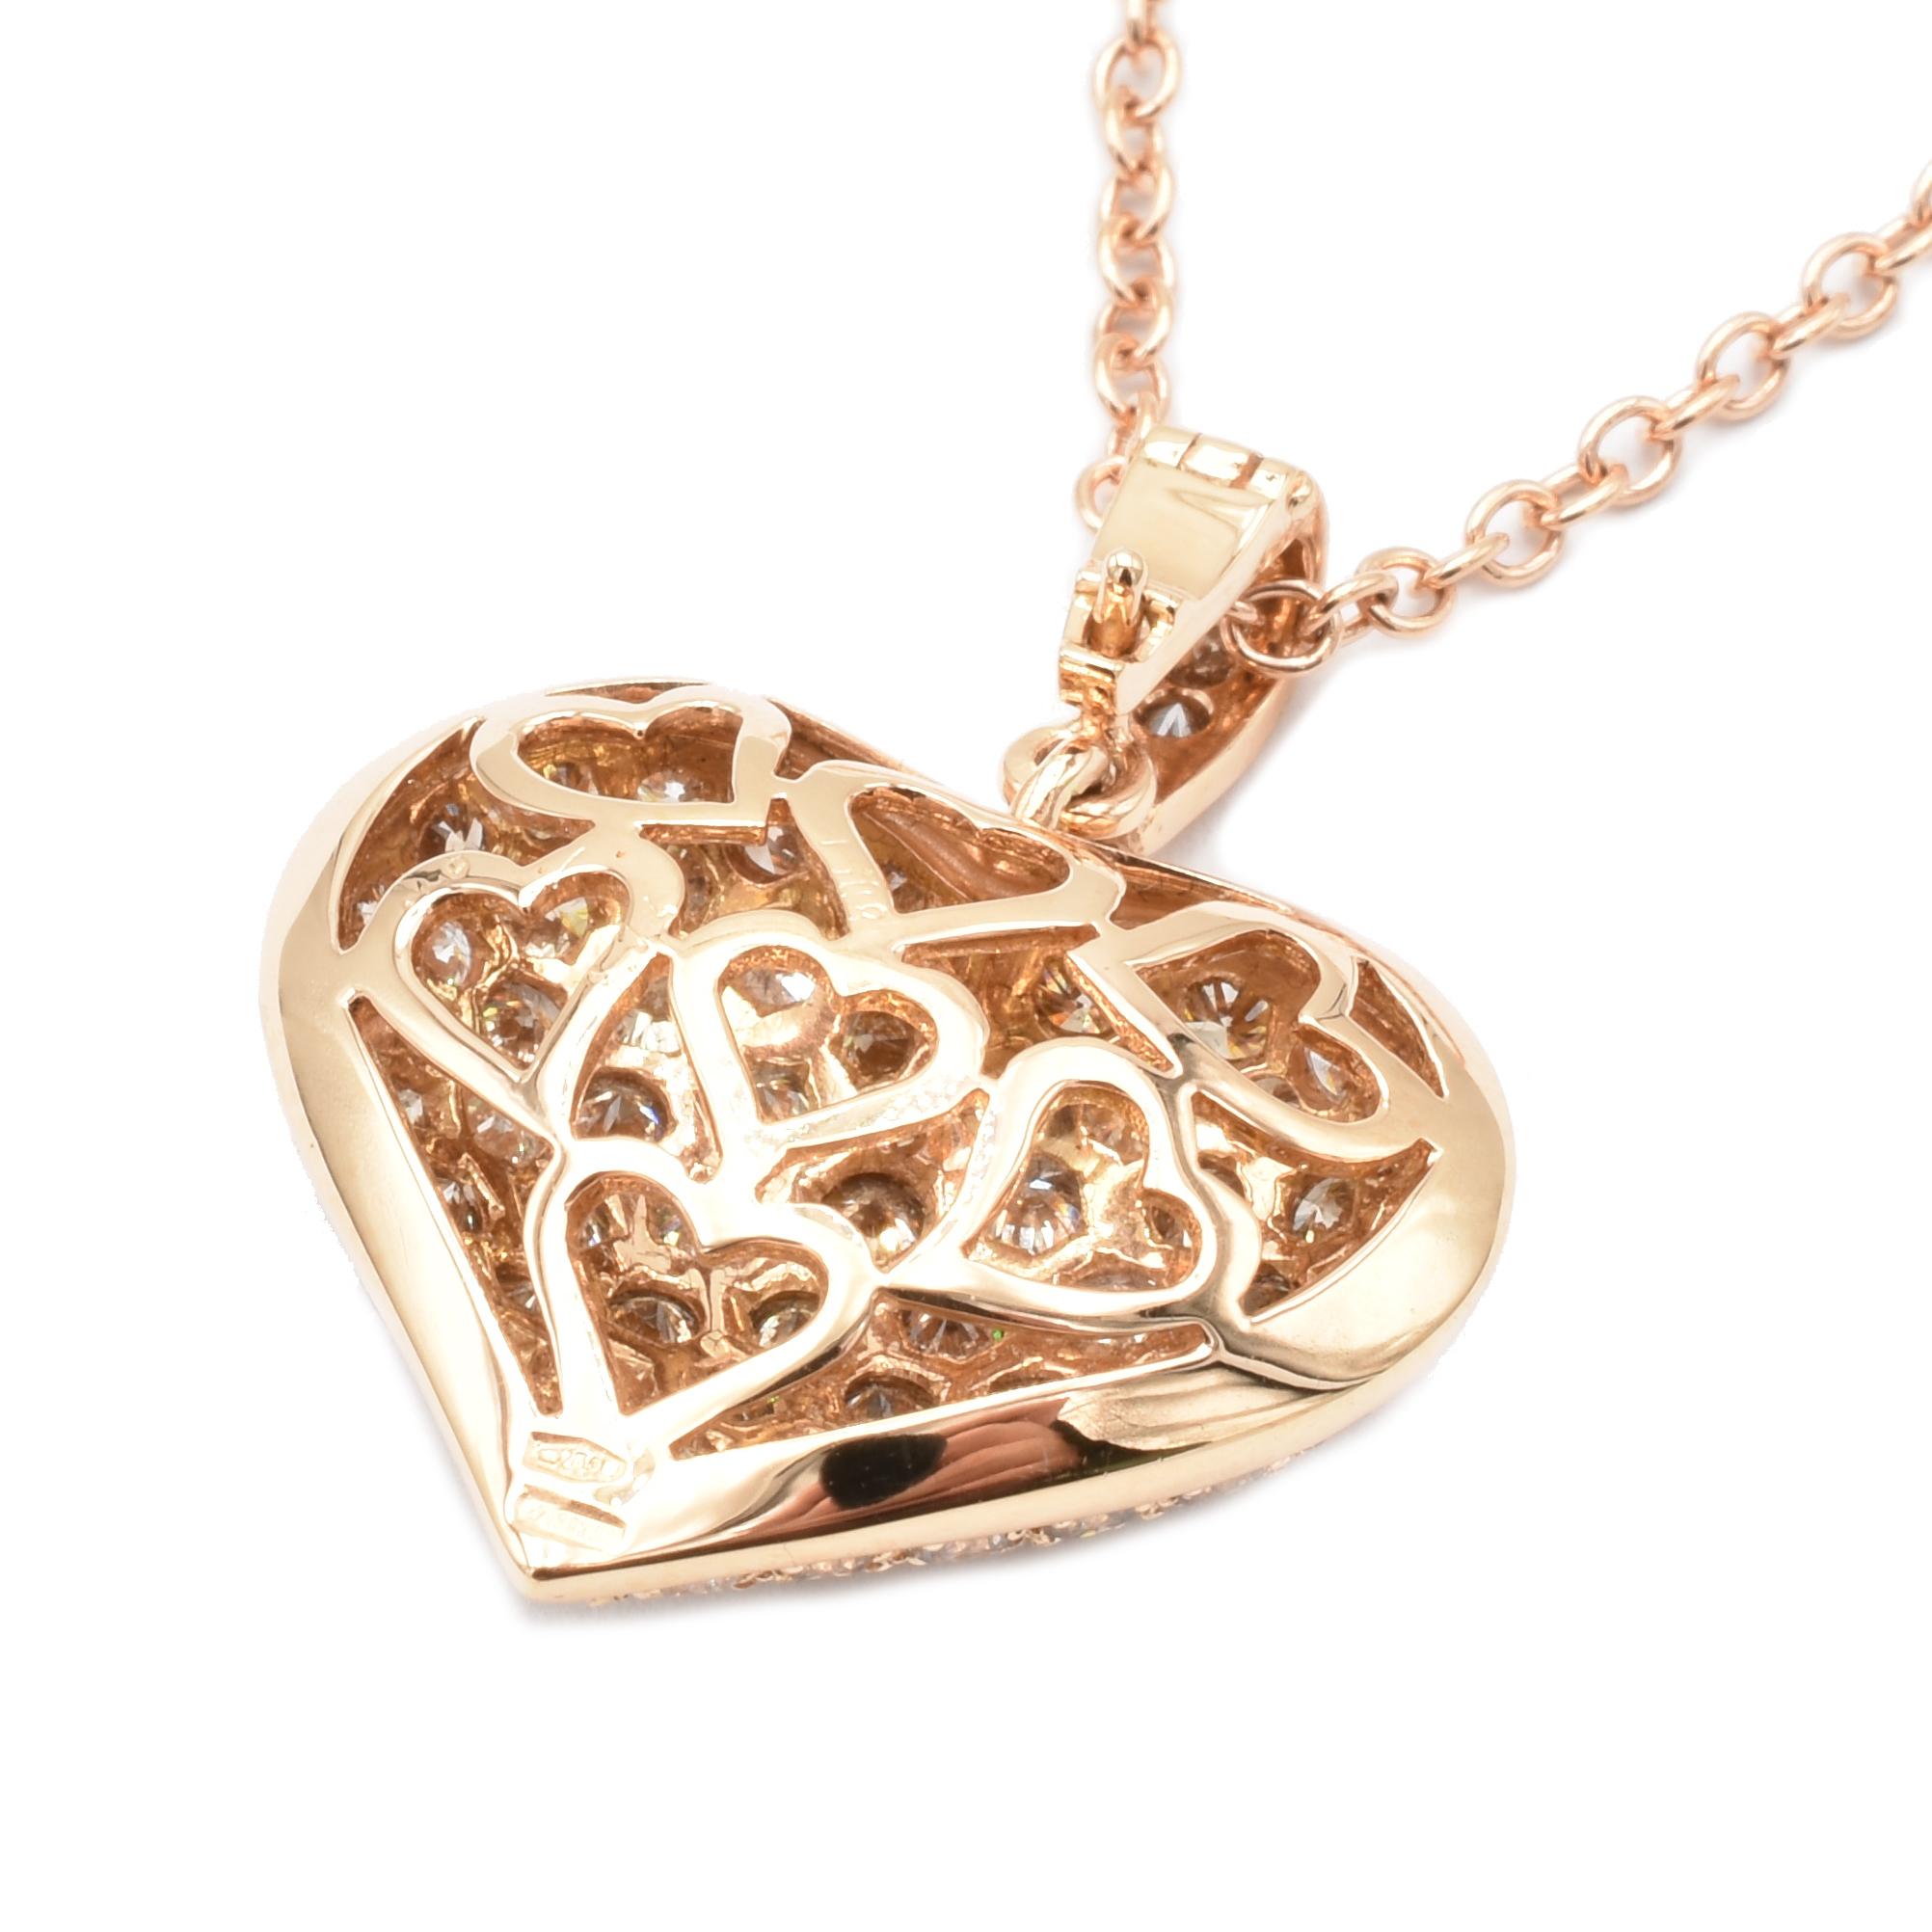 Contemporary Champagne and White Diamonds Rose Gold Heart Necklace Made in Italy